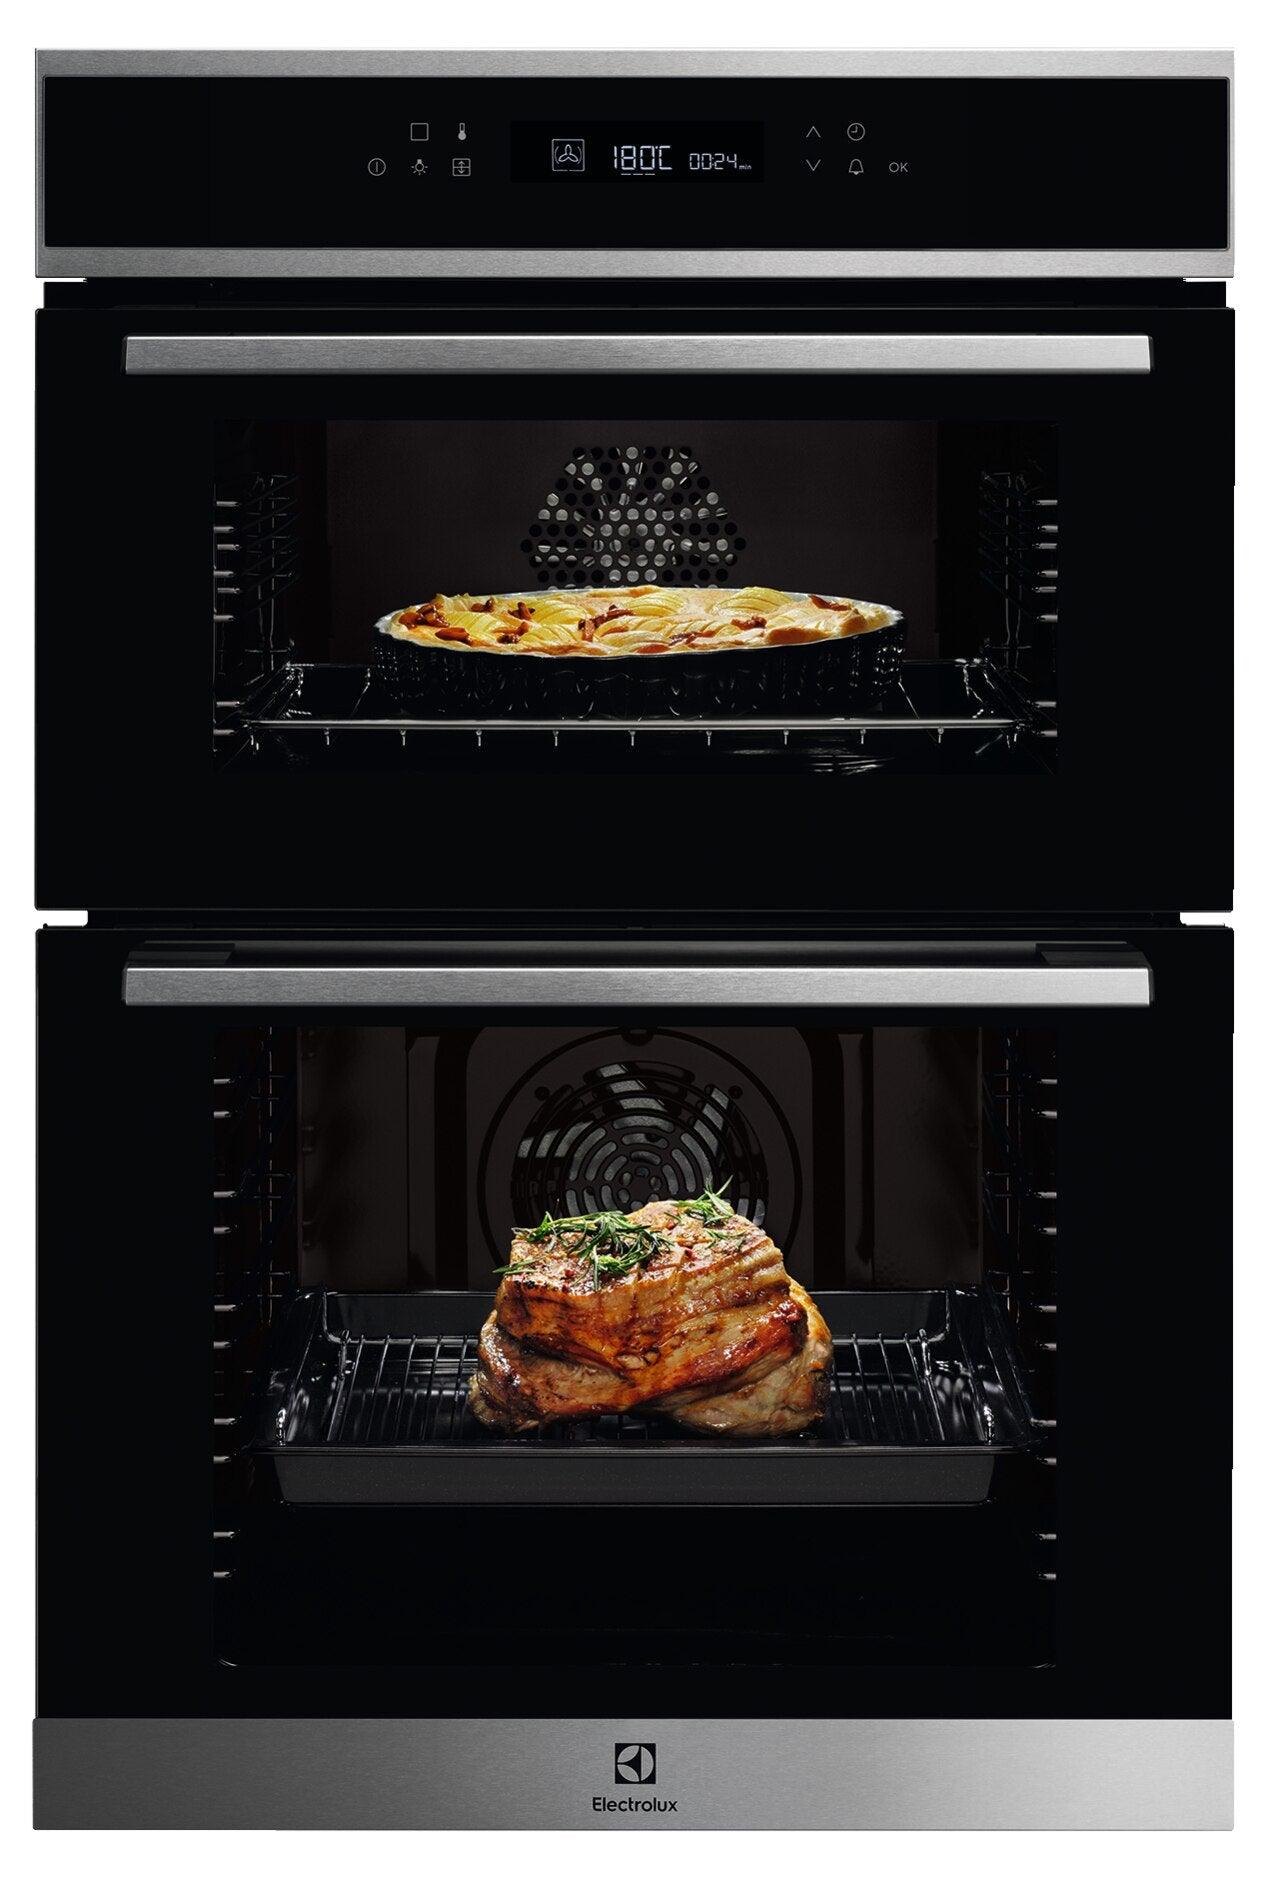 Electrolux Built-In Electric Double Oven - Stainless Steel | KDFCC00X - Peter Murphy Lighting & Electrical Ltd